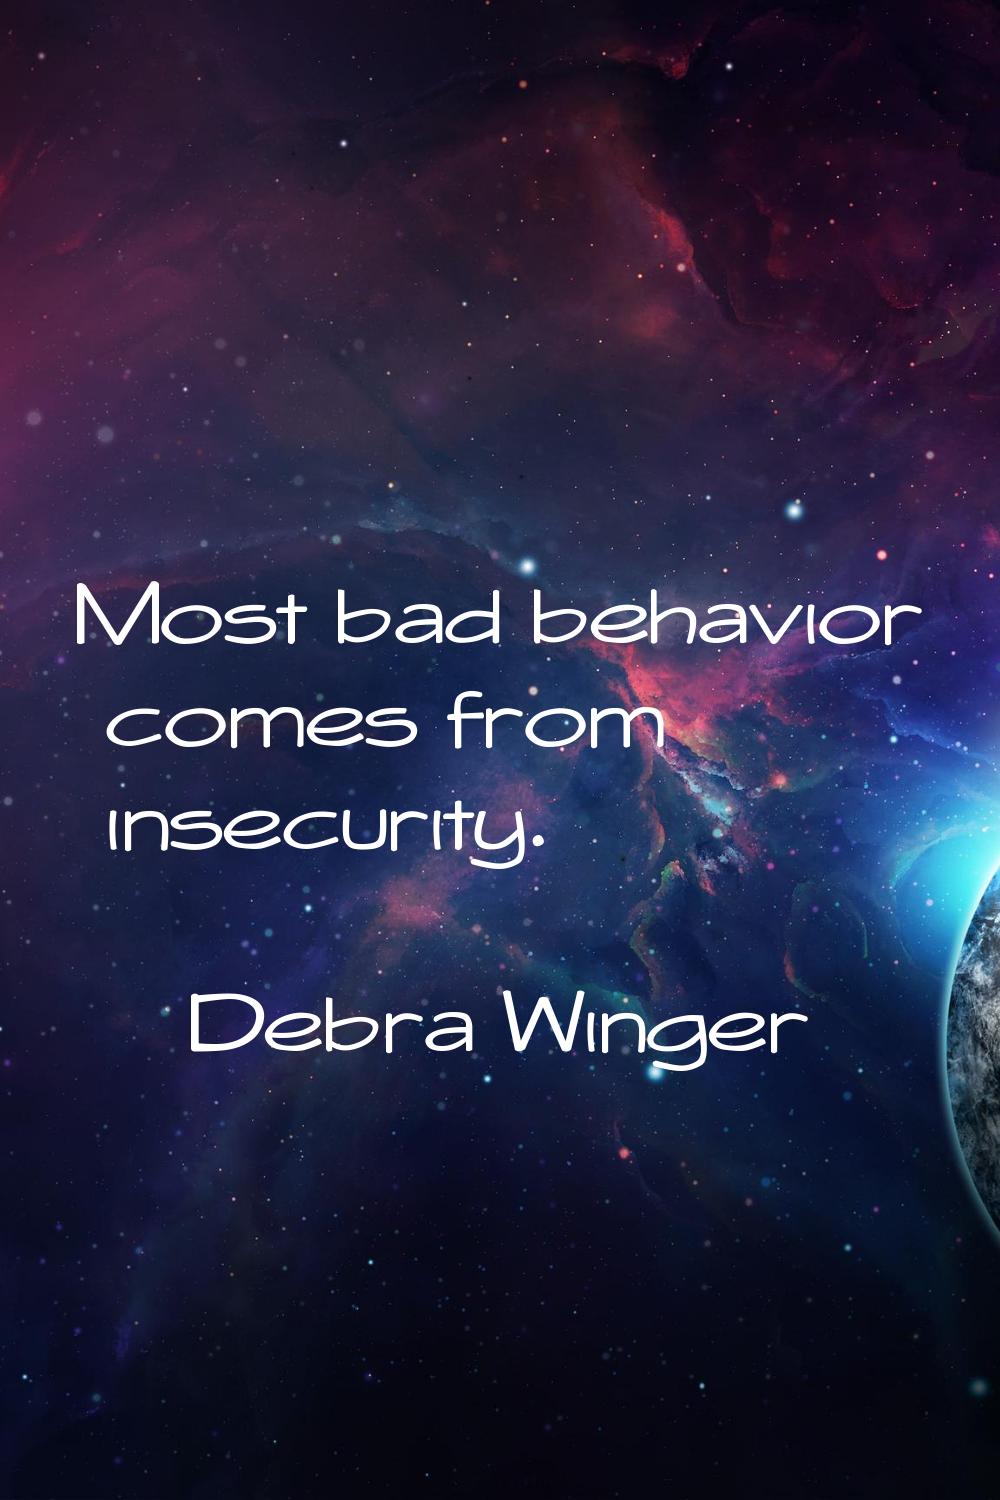 Most bad behavior comes from insecurity.